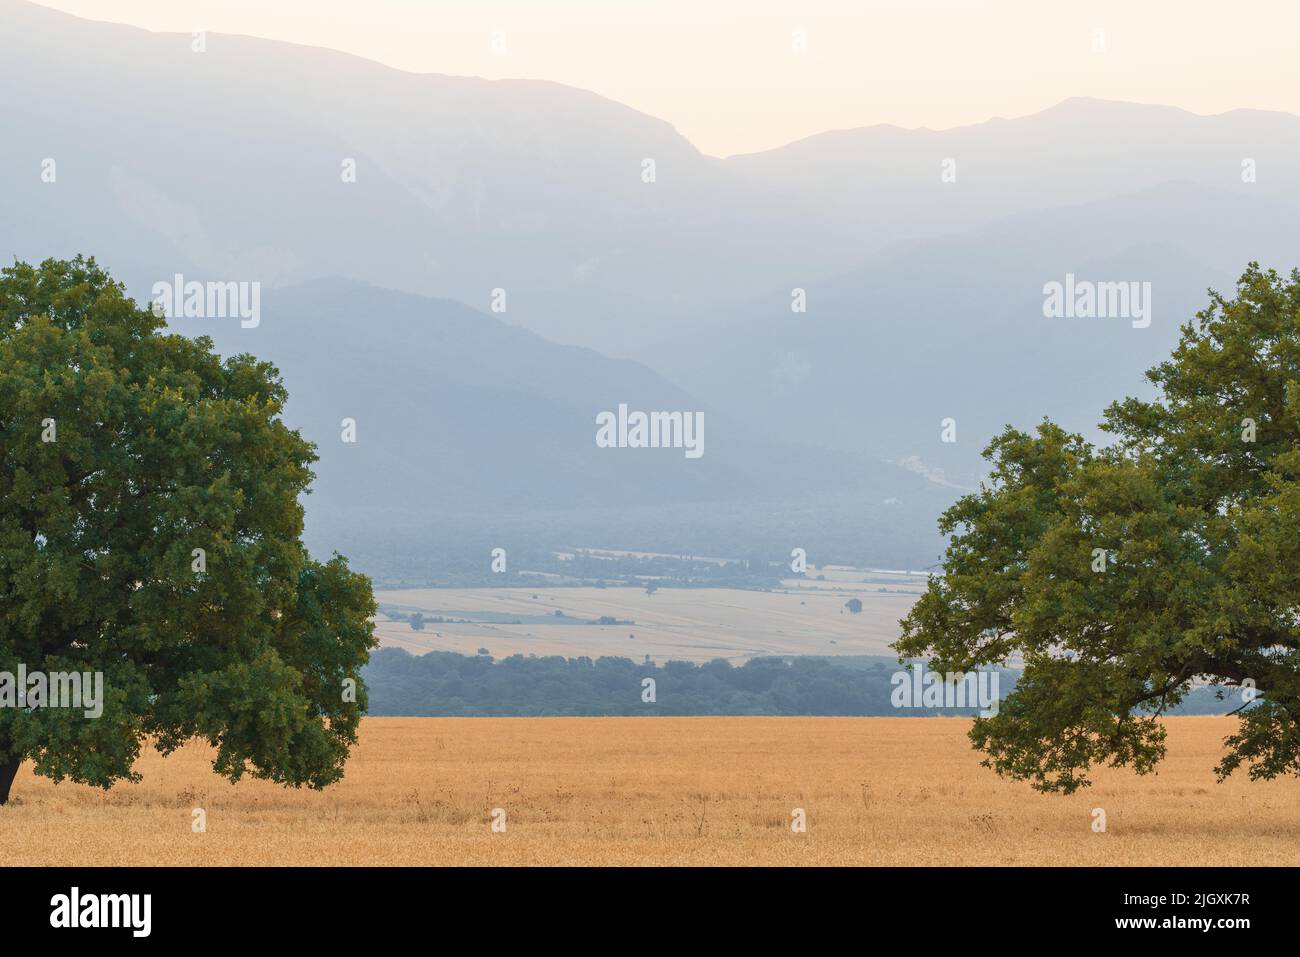 Tree in a wheat field in front of mountains Stock Photo